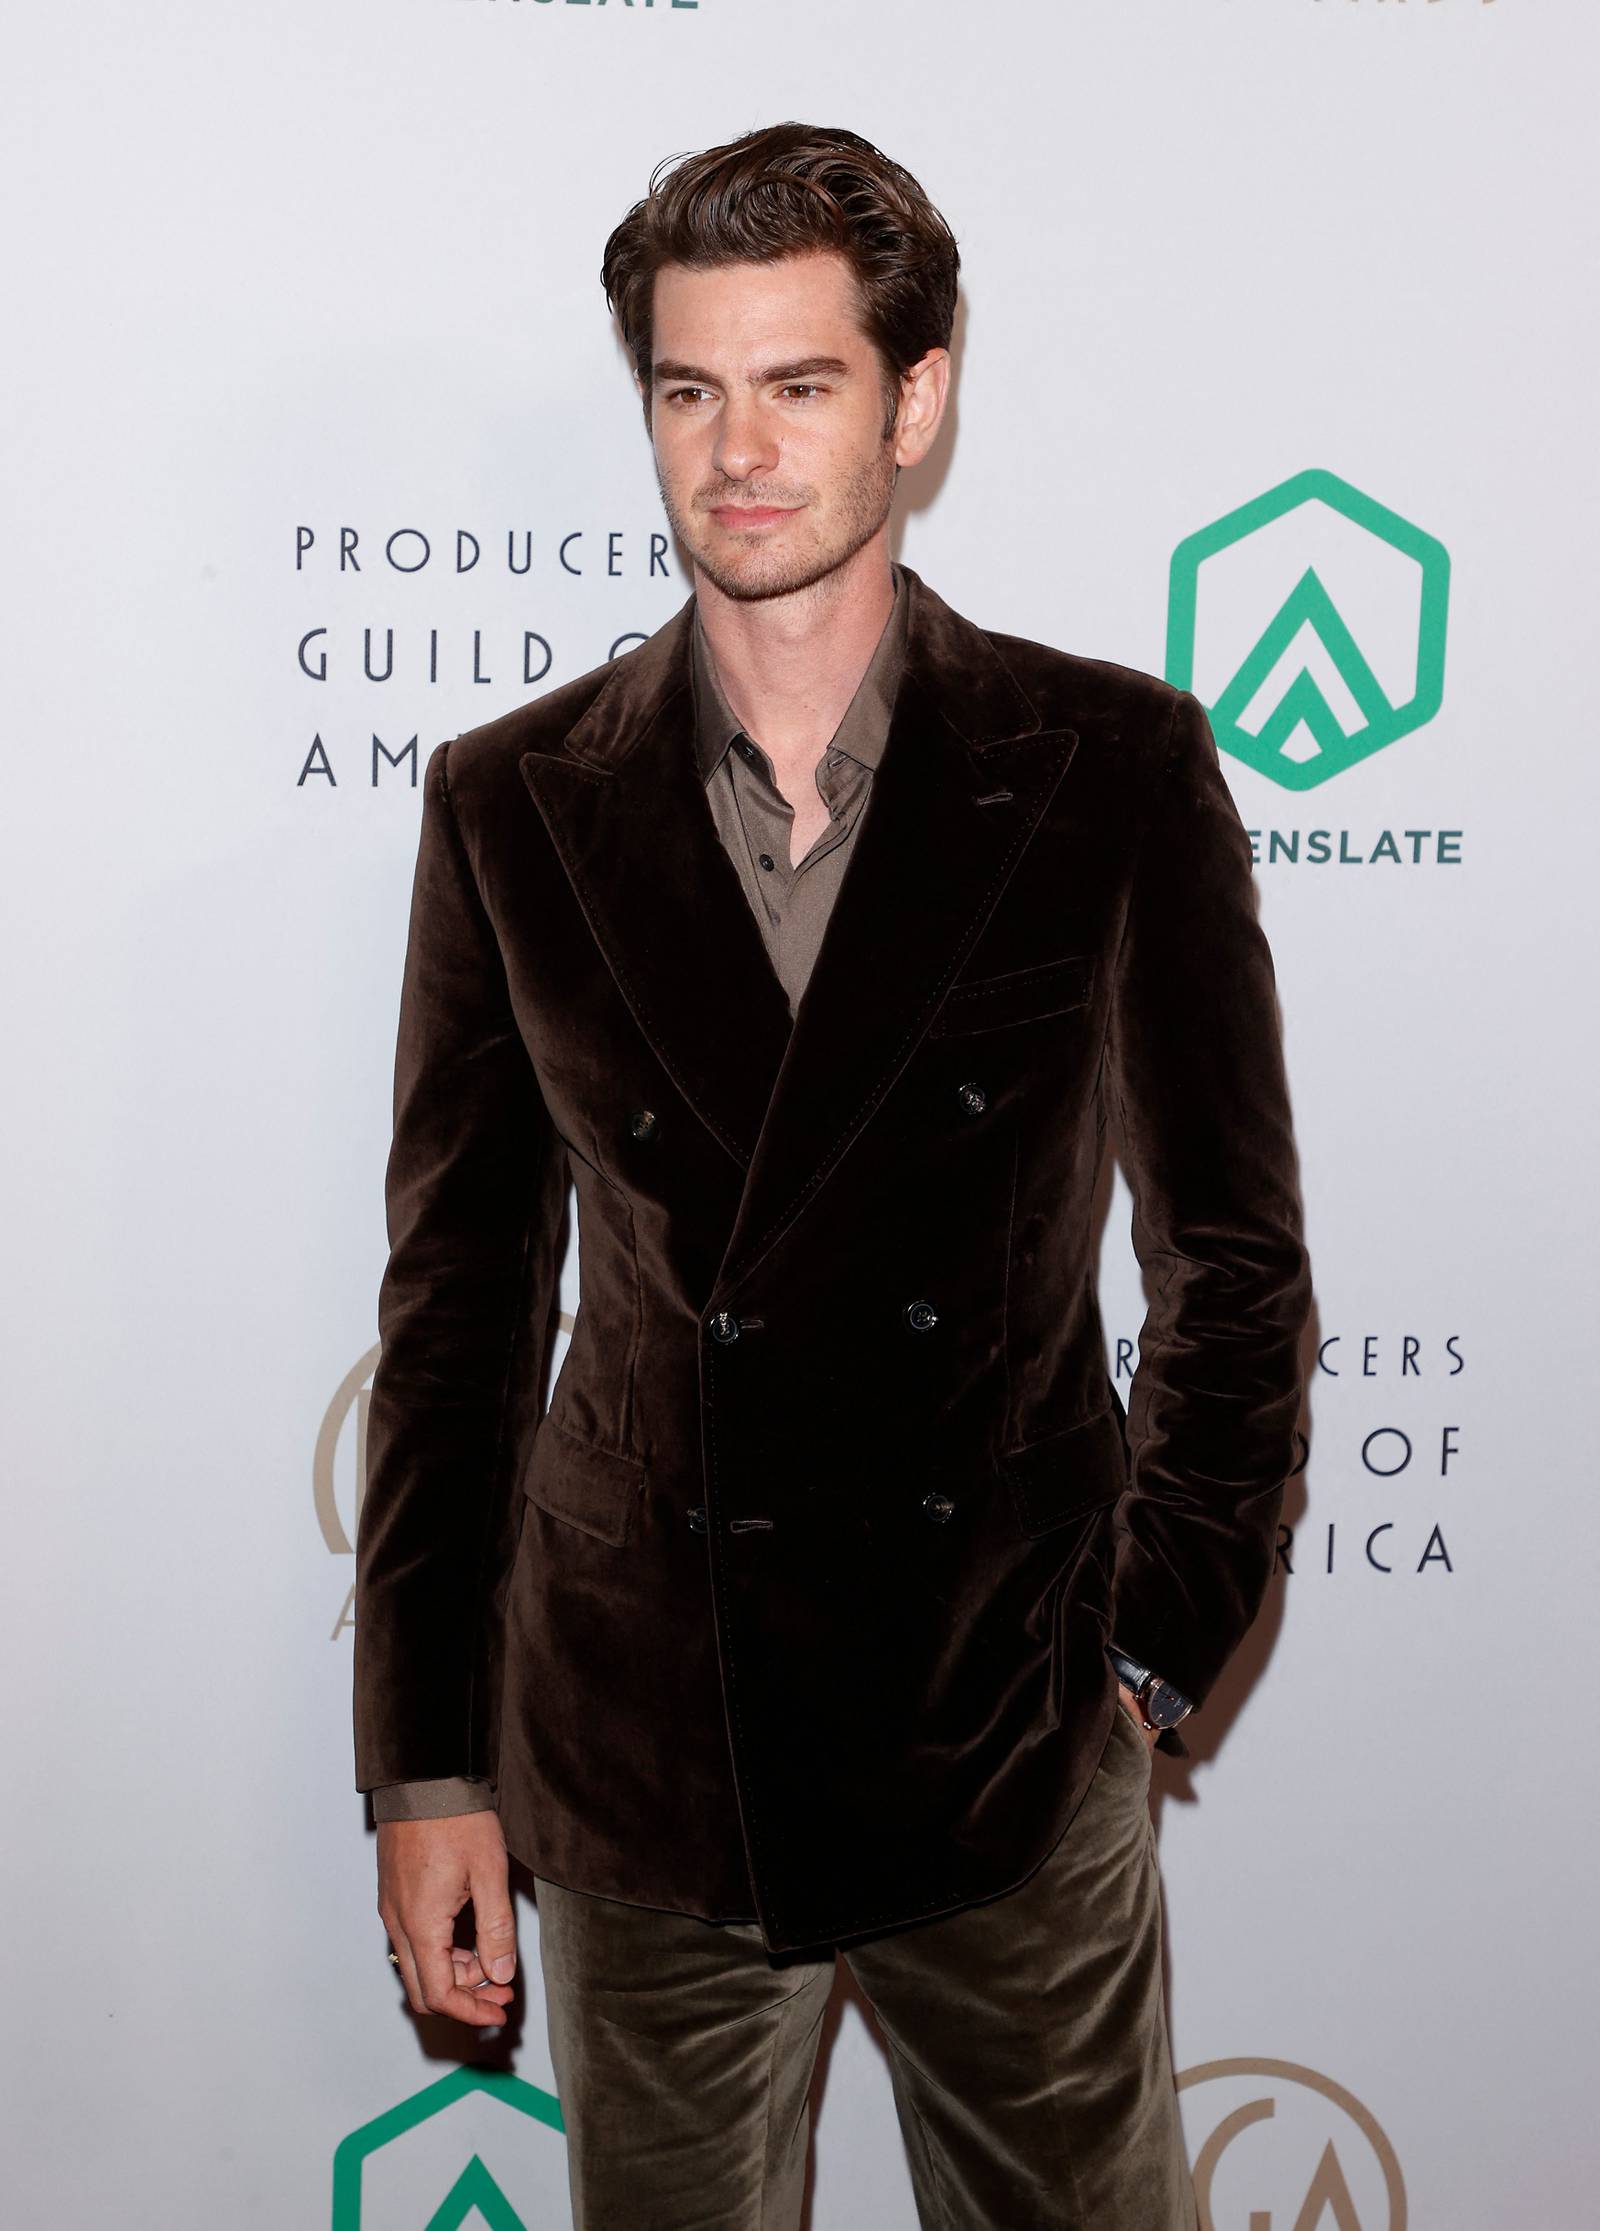 Producers Guild Awards 2022 Fashion Best Dressed Stars At The Los Angeles Event